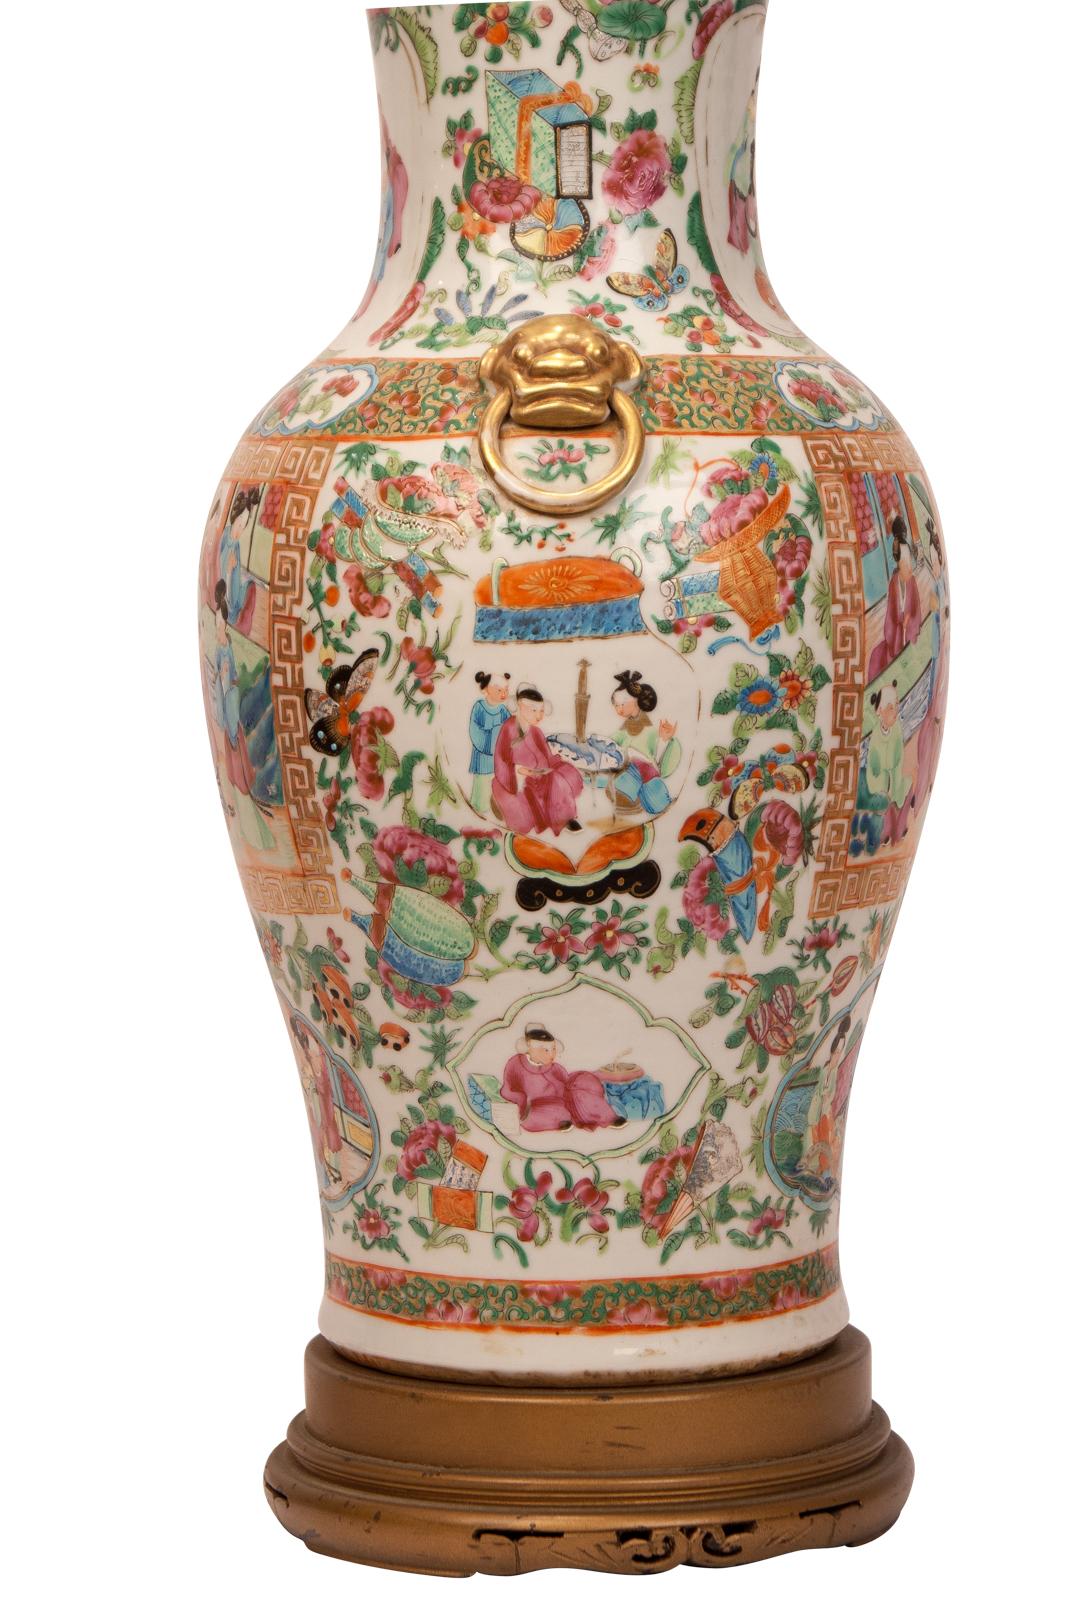 Porcelain Large Pair of Rose Medallion Vases, Later Mounted as Lamps, China, circa 1850